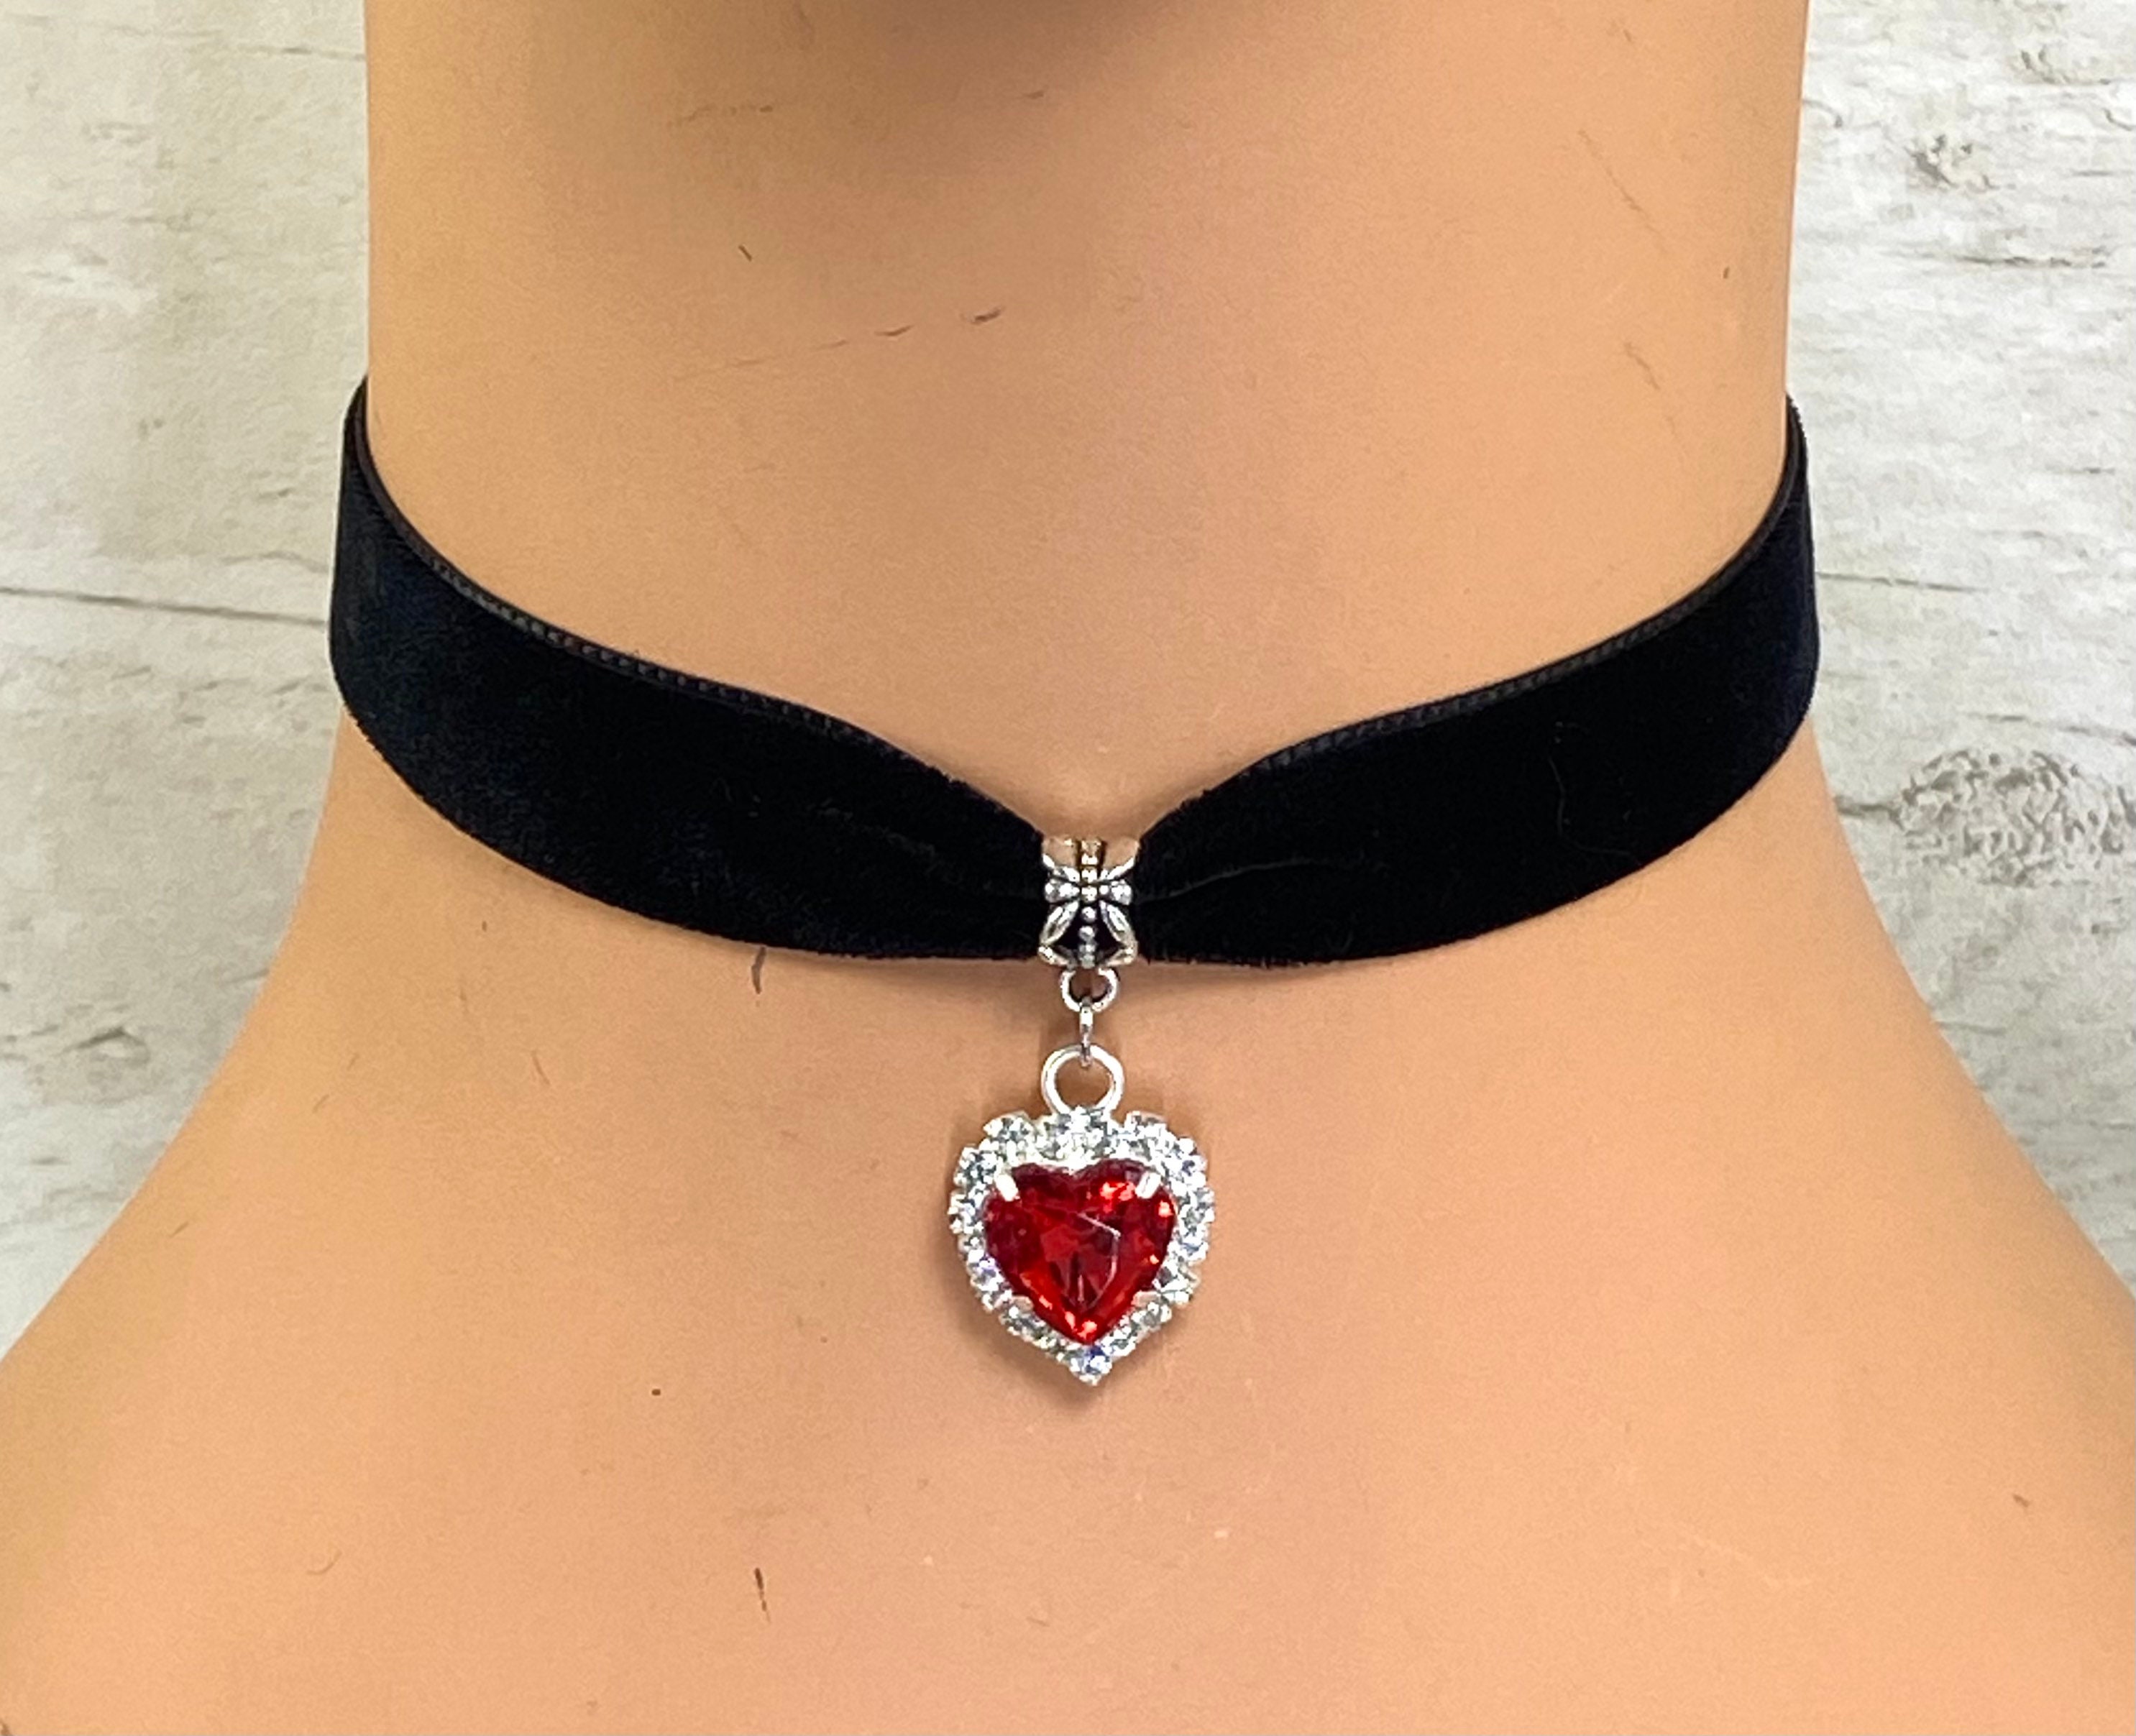 Mini or XL Silver Puffed Heart String Necklace Black Cord Long Wrap Tie  Choker Stainless Steel 3D Puffy Pendant Handmade Unisex Jewelry 